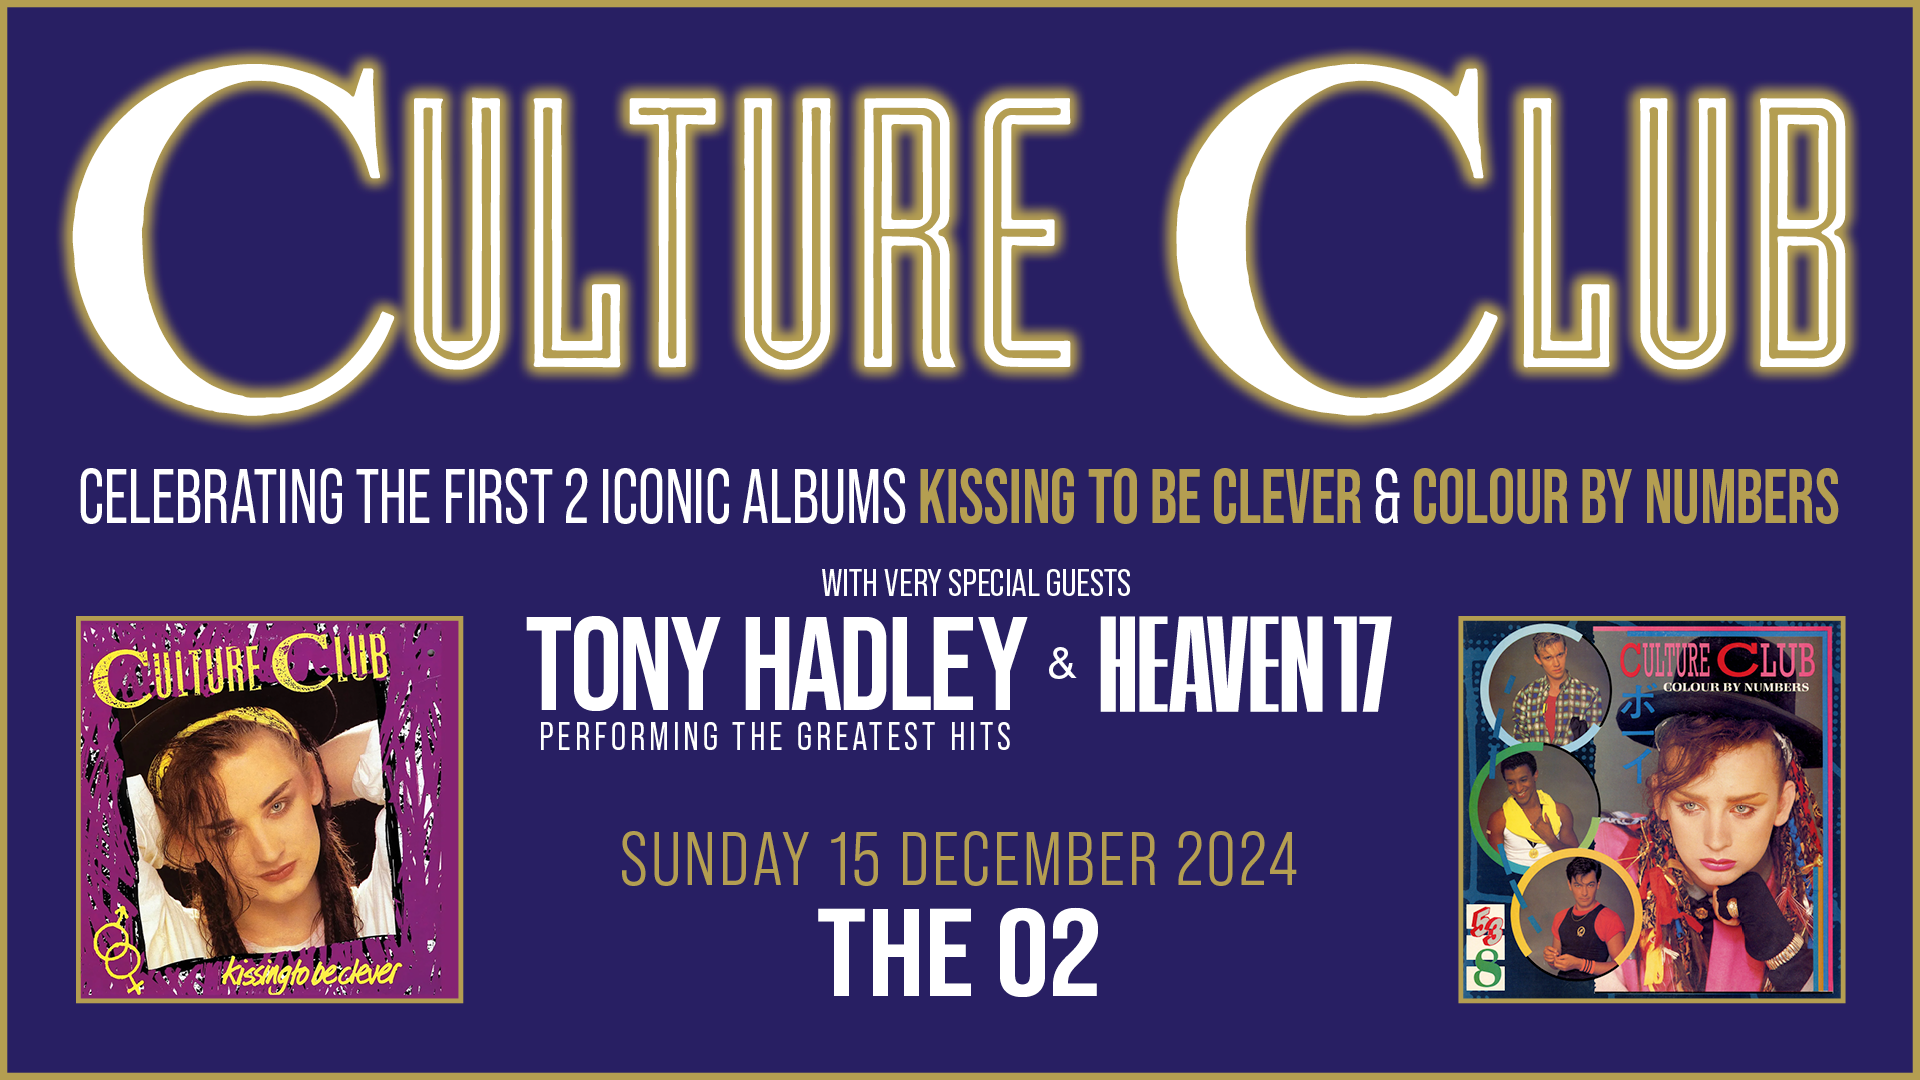 Artwork for Culture Club's show at The O2